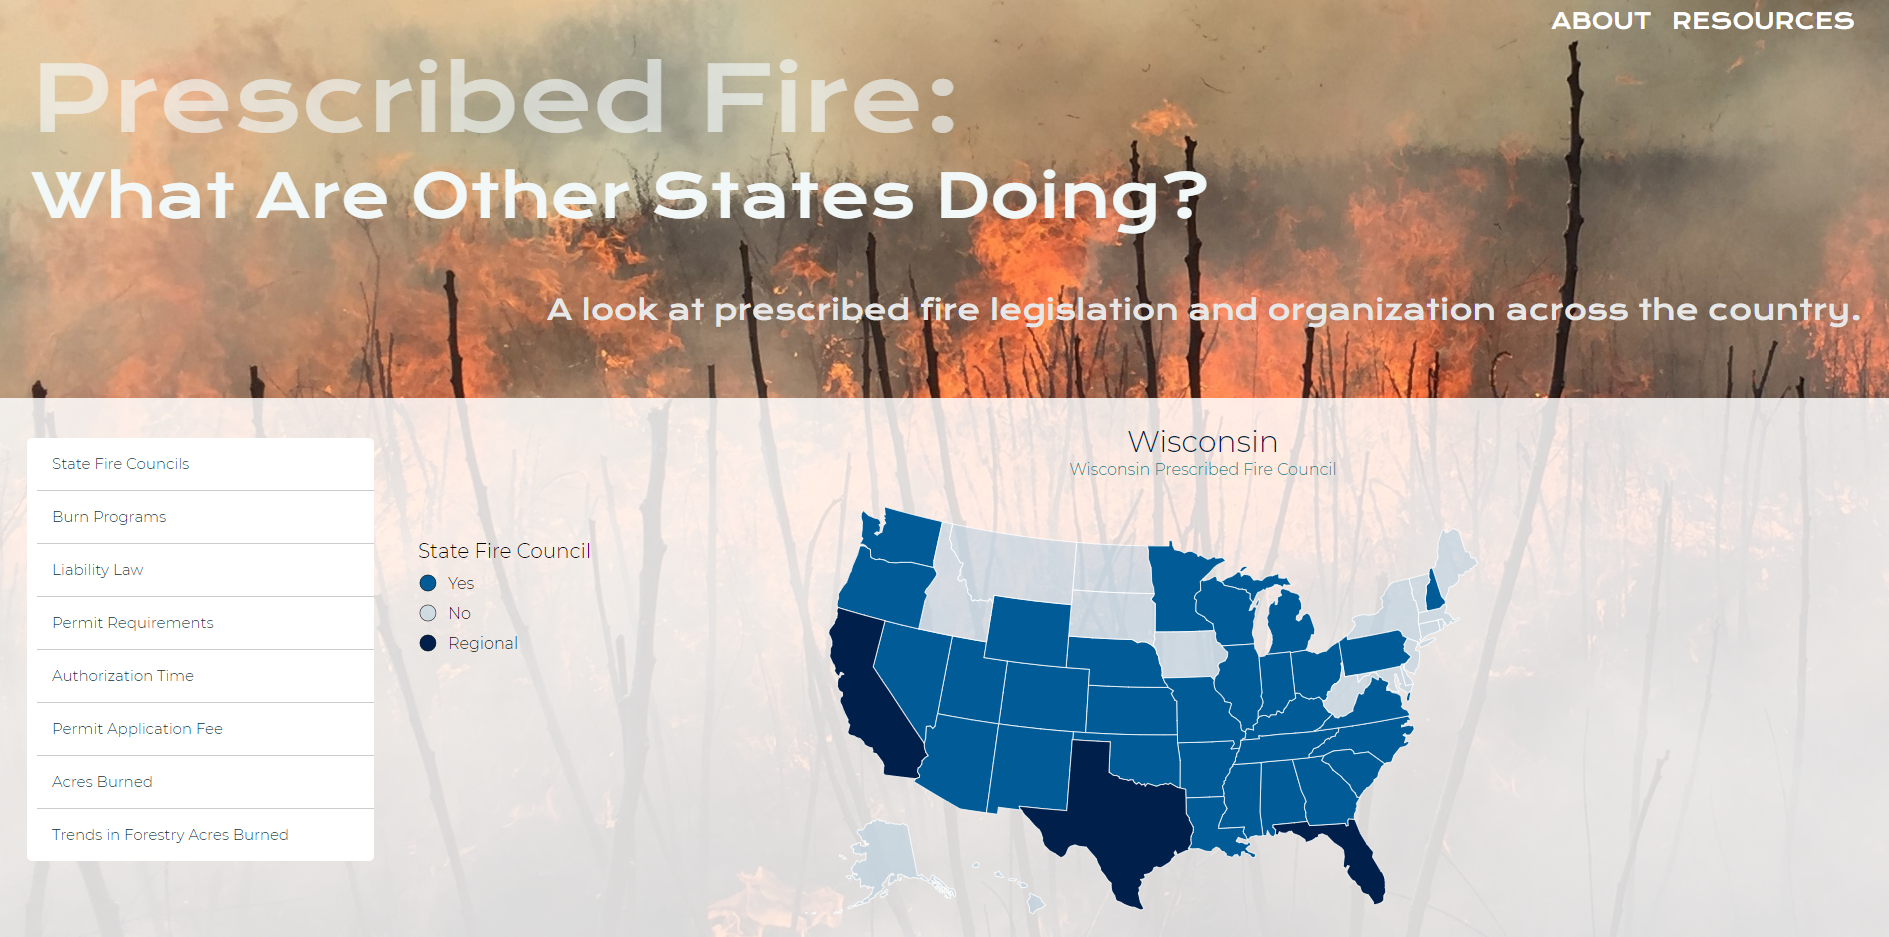 Prescribed Fire: What Are Other States Doing?